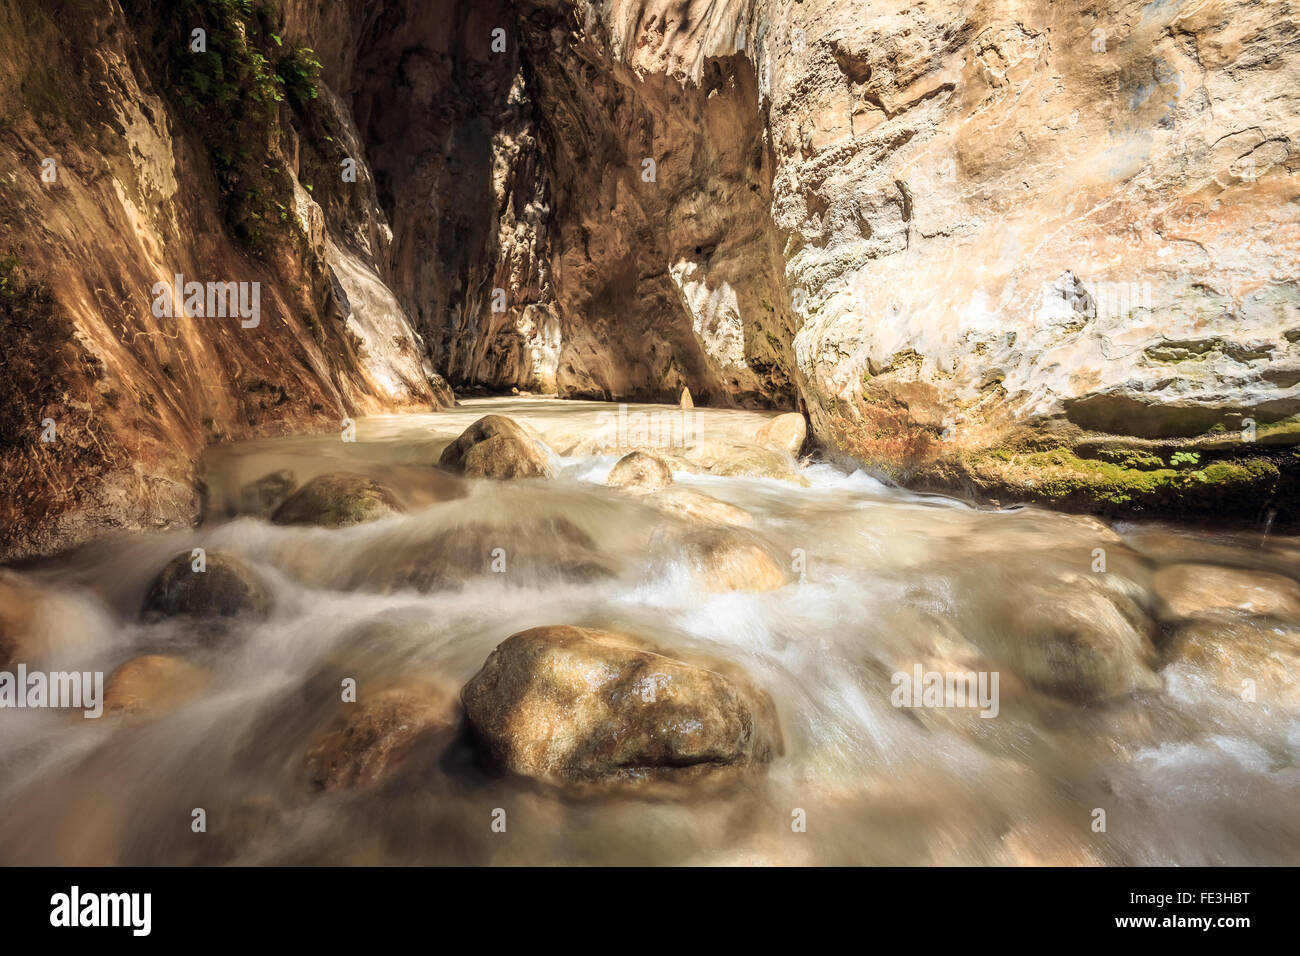 Popular tourist route In river bed Rio Chillar River In Nerja, Malaga, Spain. Water flow, slow motion. Stock Photo